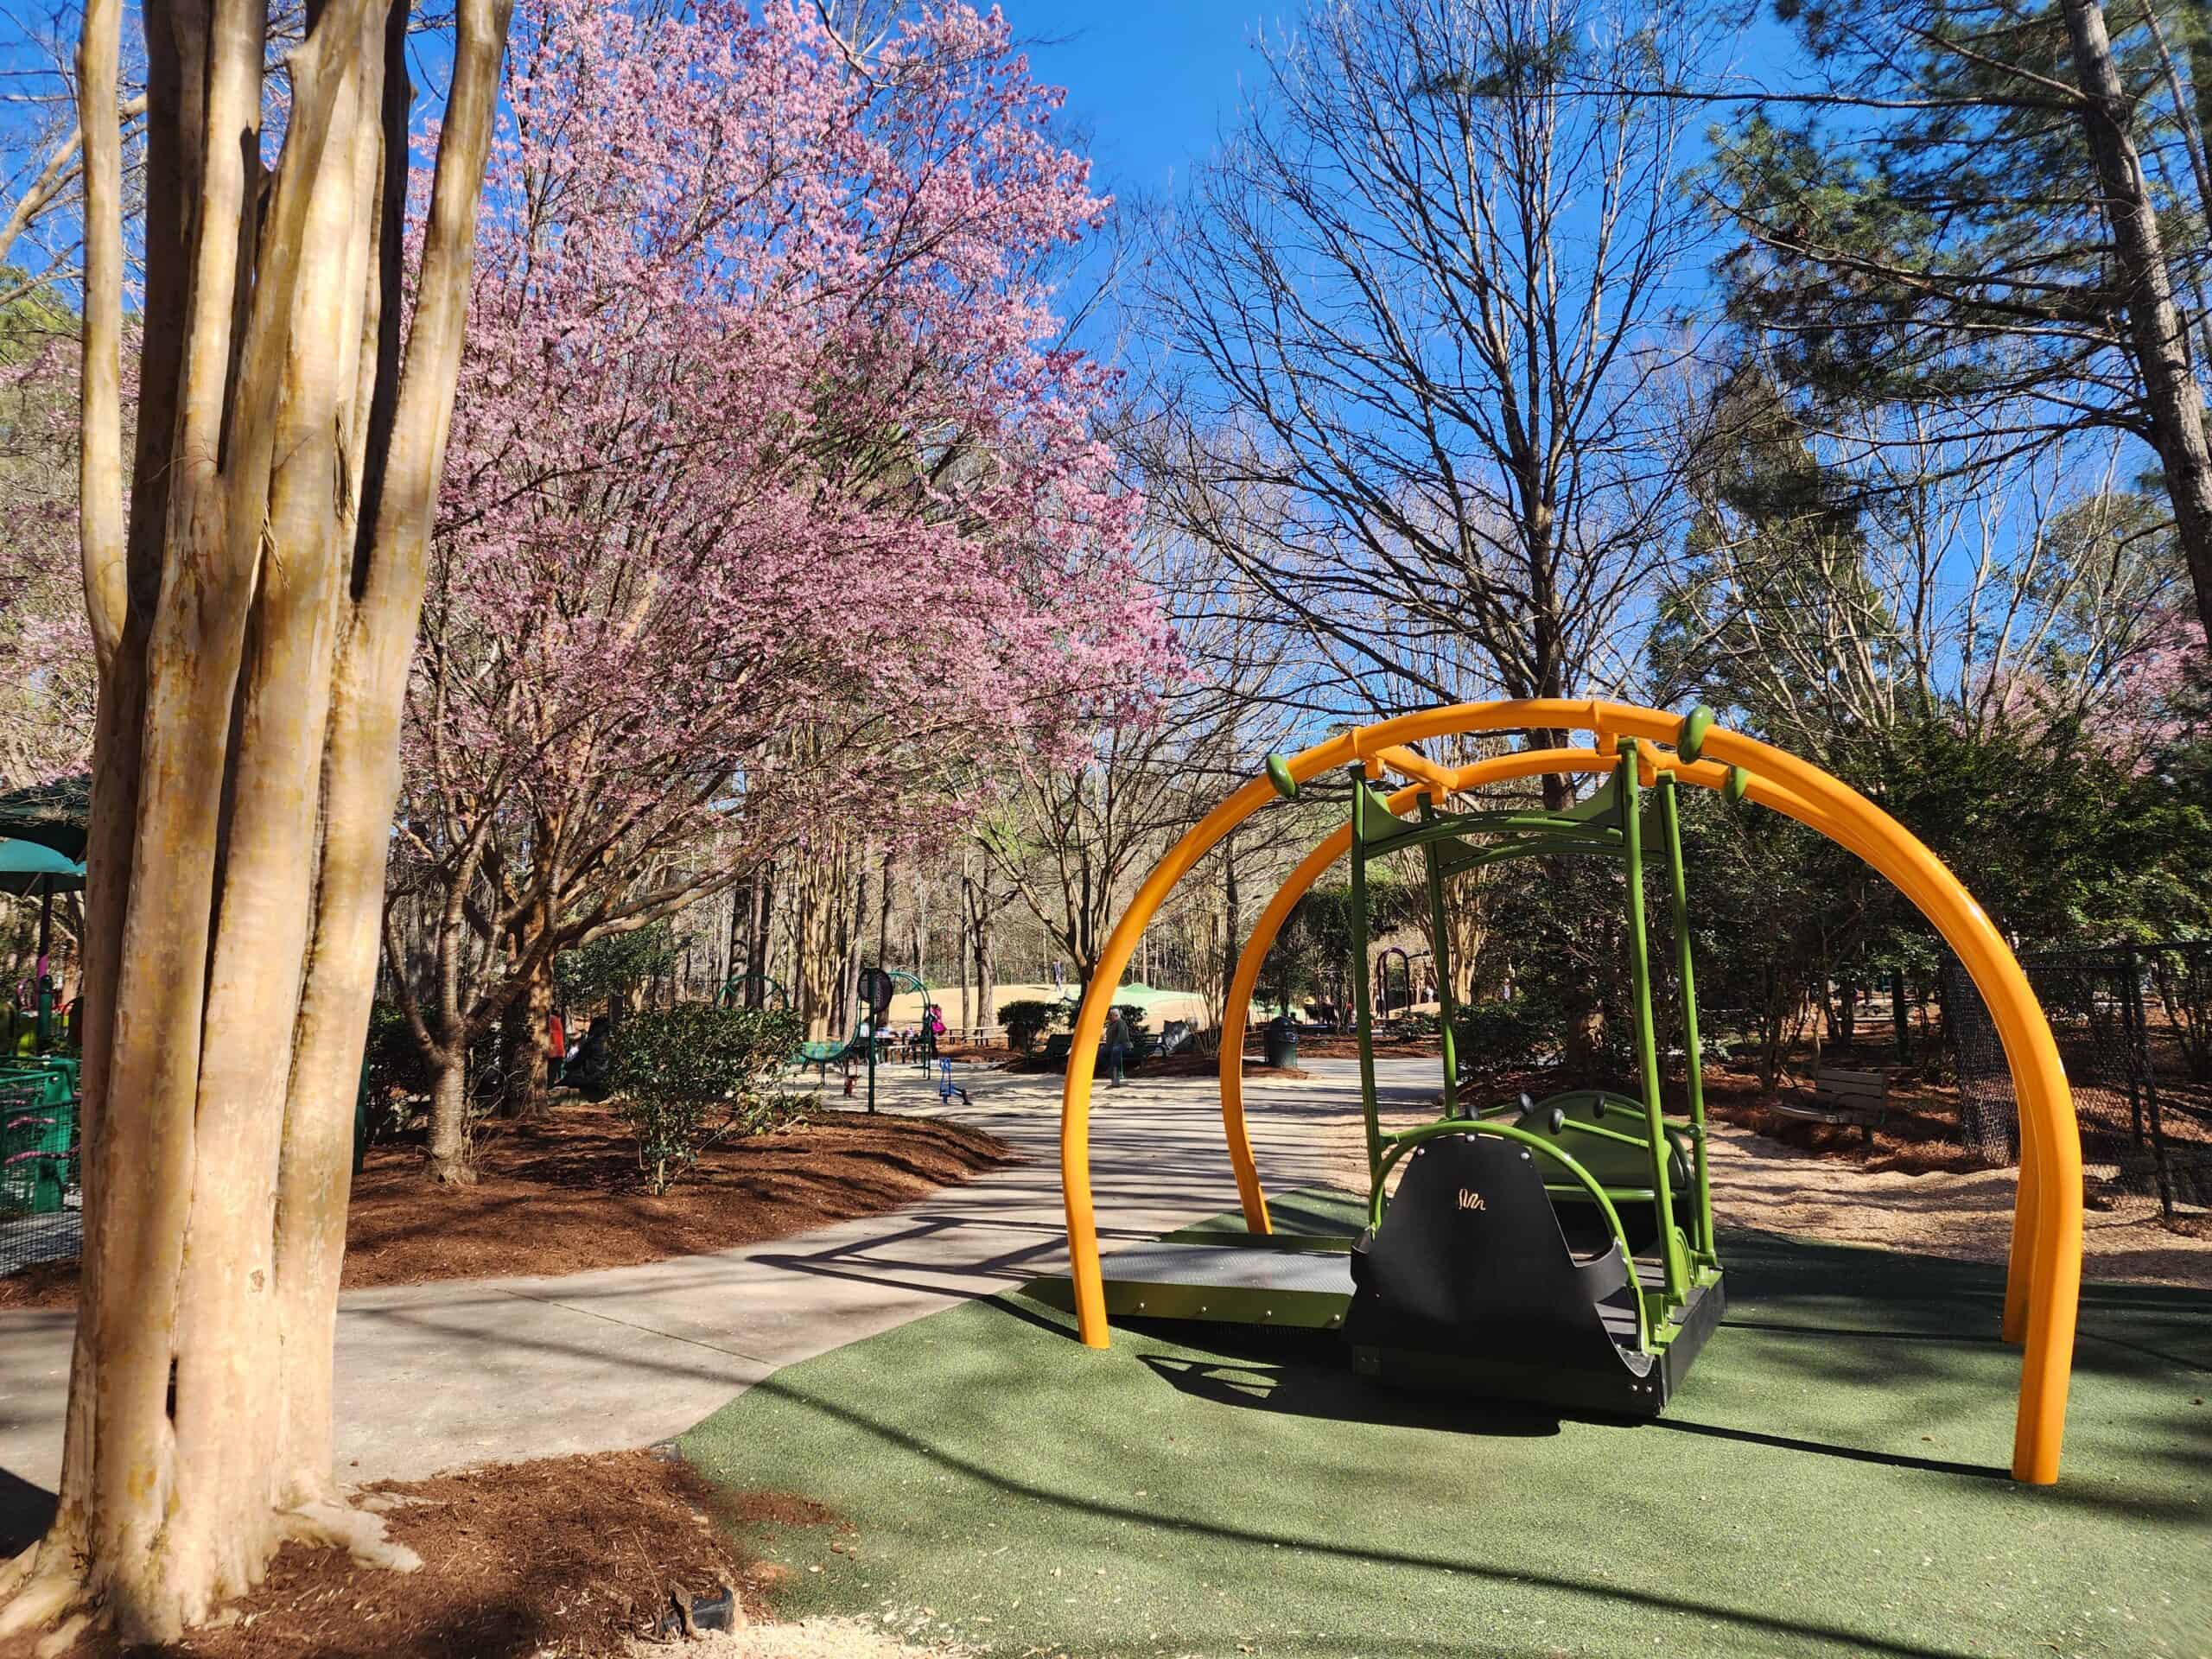 An accessible, inclusive swing set awaits its next visitor at a Cary, NC playground. Surrounded by a vibrant landscape with blooming pink cherry blossoms and the contrasting bare branches of winter trees, this park provides a welcoming environment for children of all abilities against a bright blue sky.